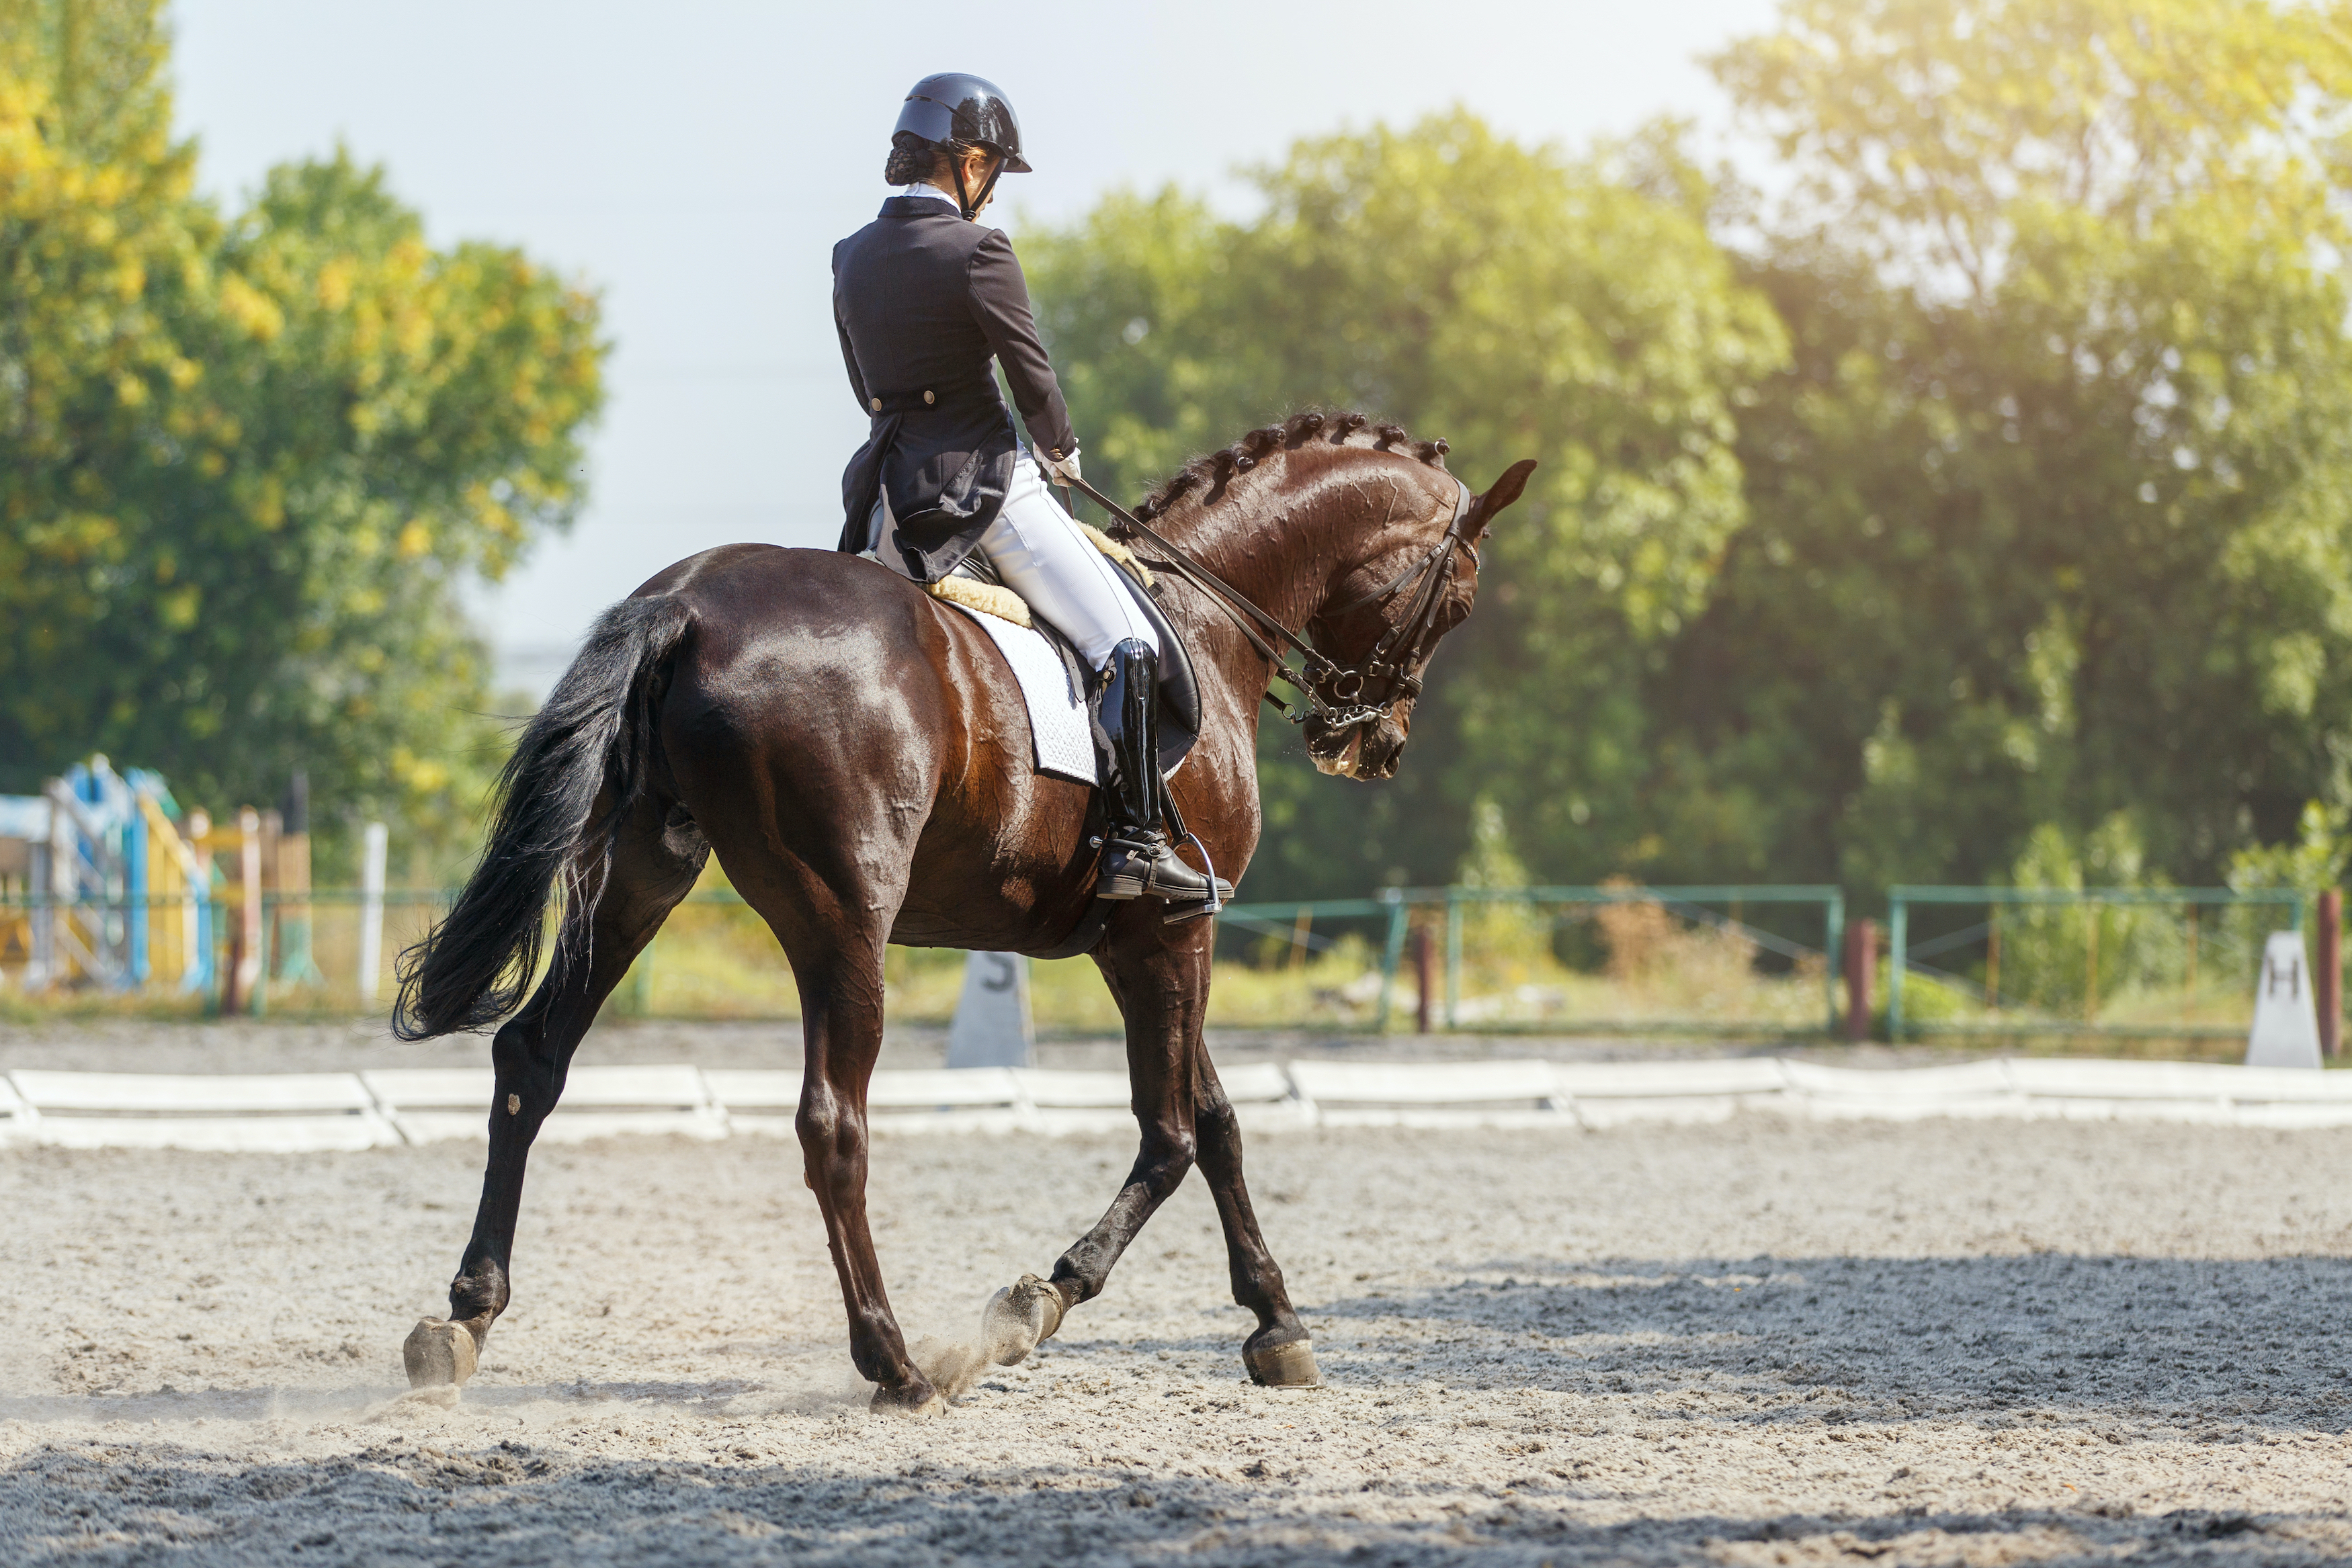 We Asked an Expert How Many Times It's OK to Whip a Horse in the Space of One Minute